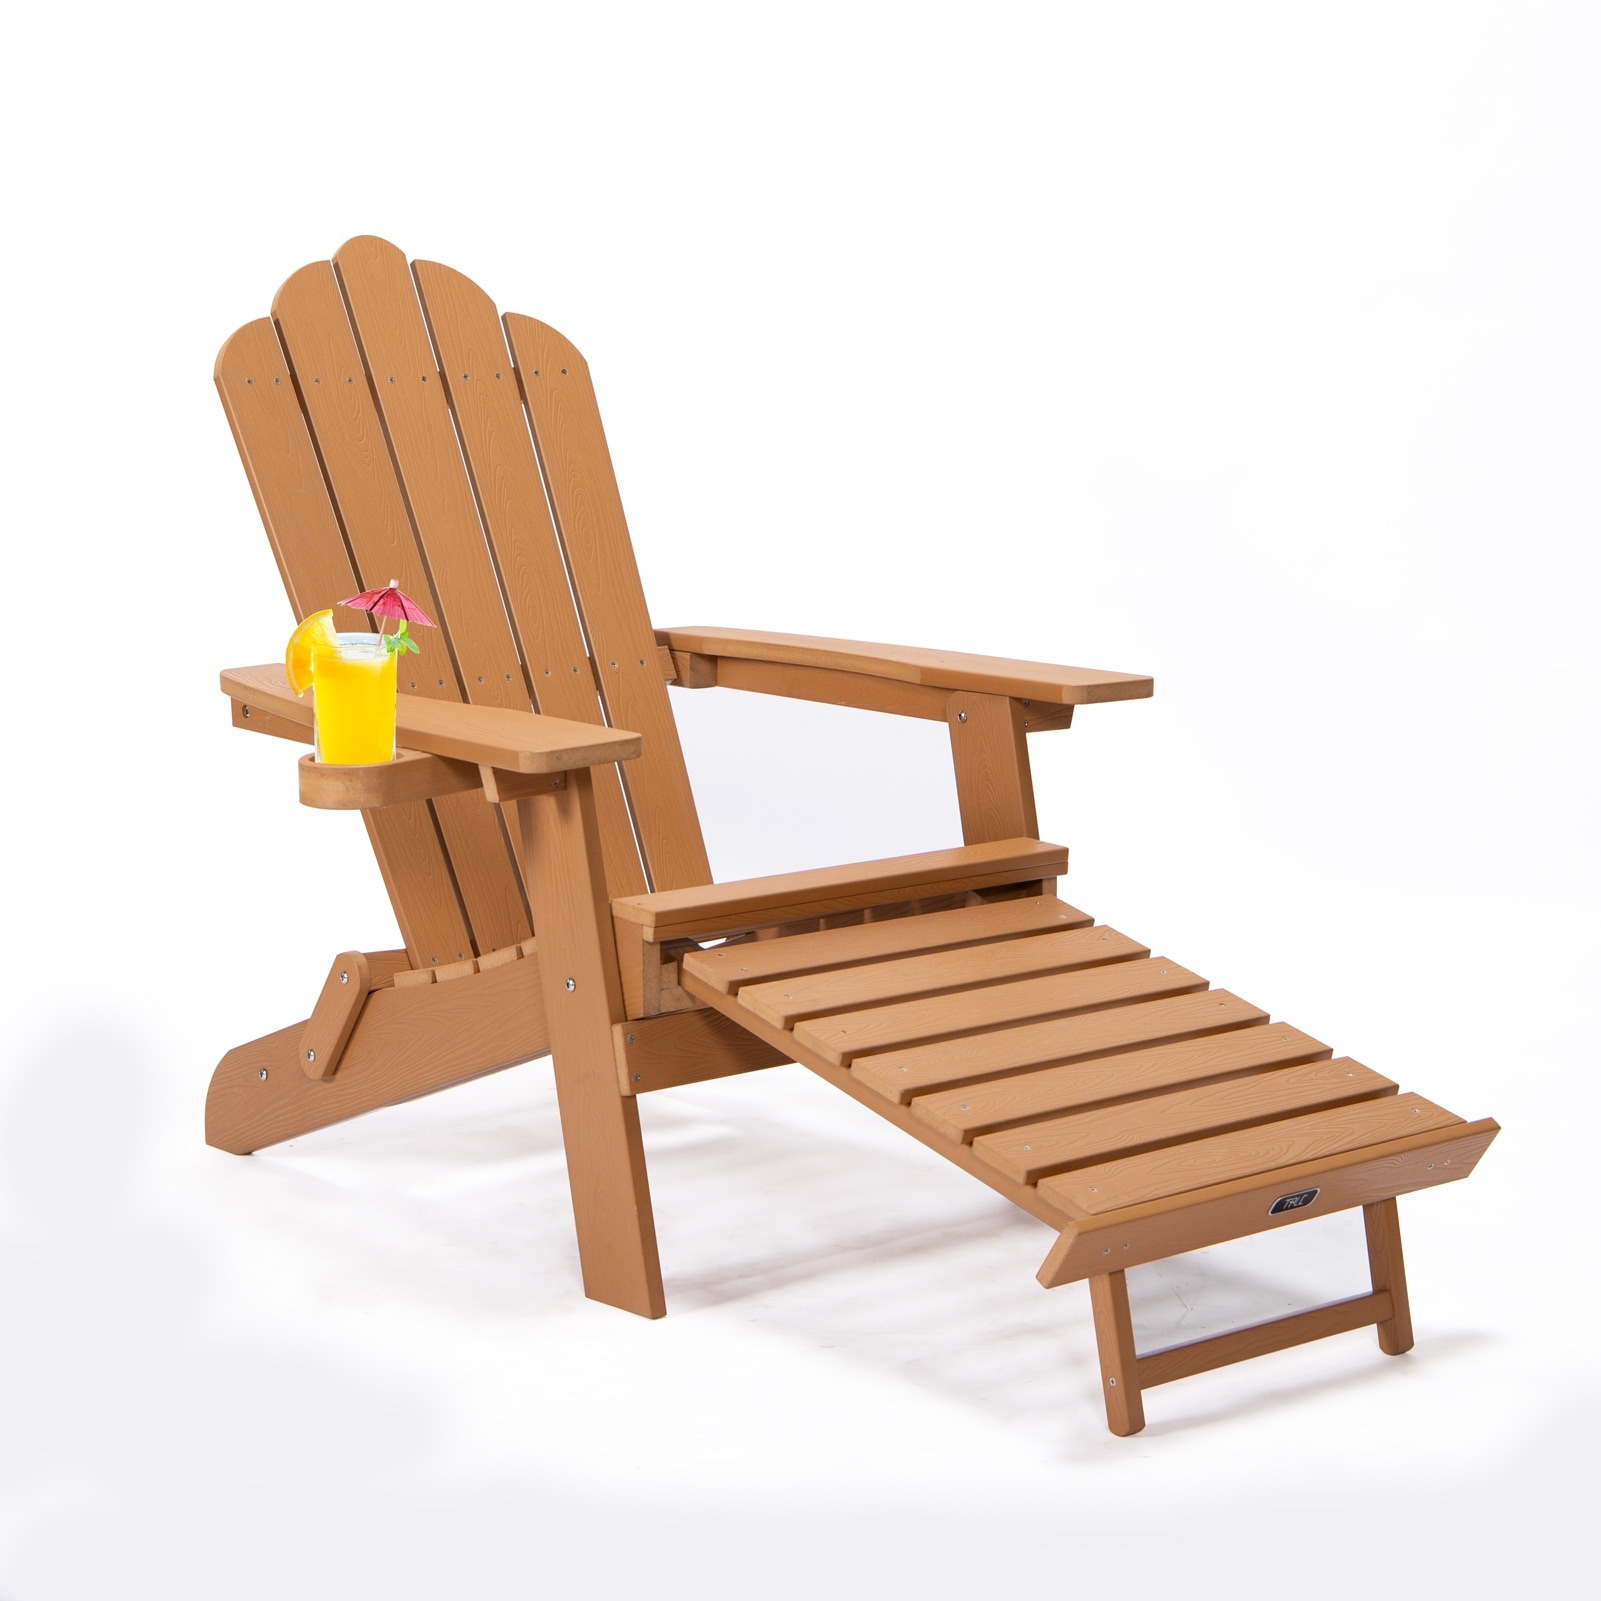 Folding Adirondack Chair With Pullout Ottoman With Cup Holder And Oversized  Poly Lumber For Patio Deck Garden